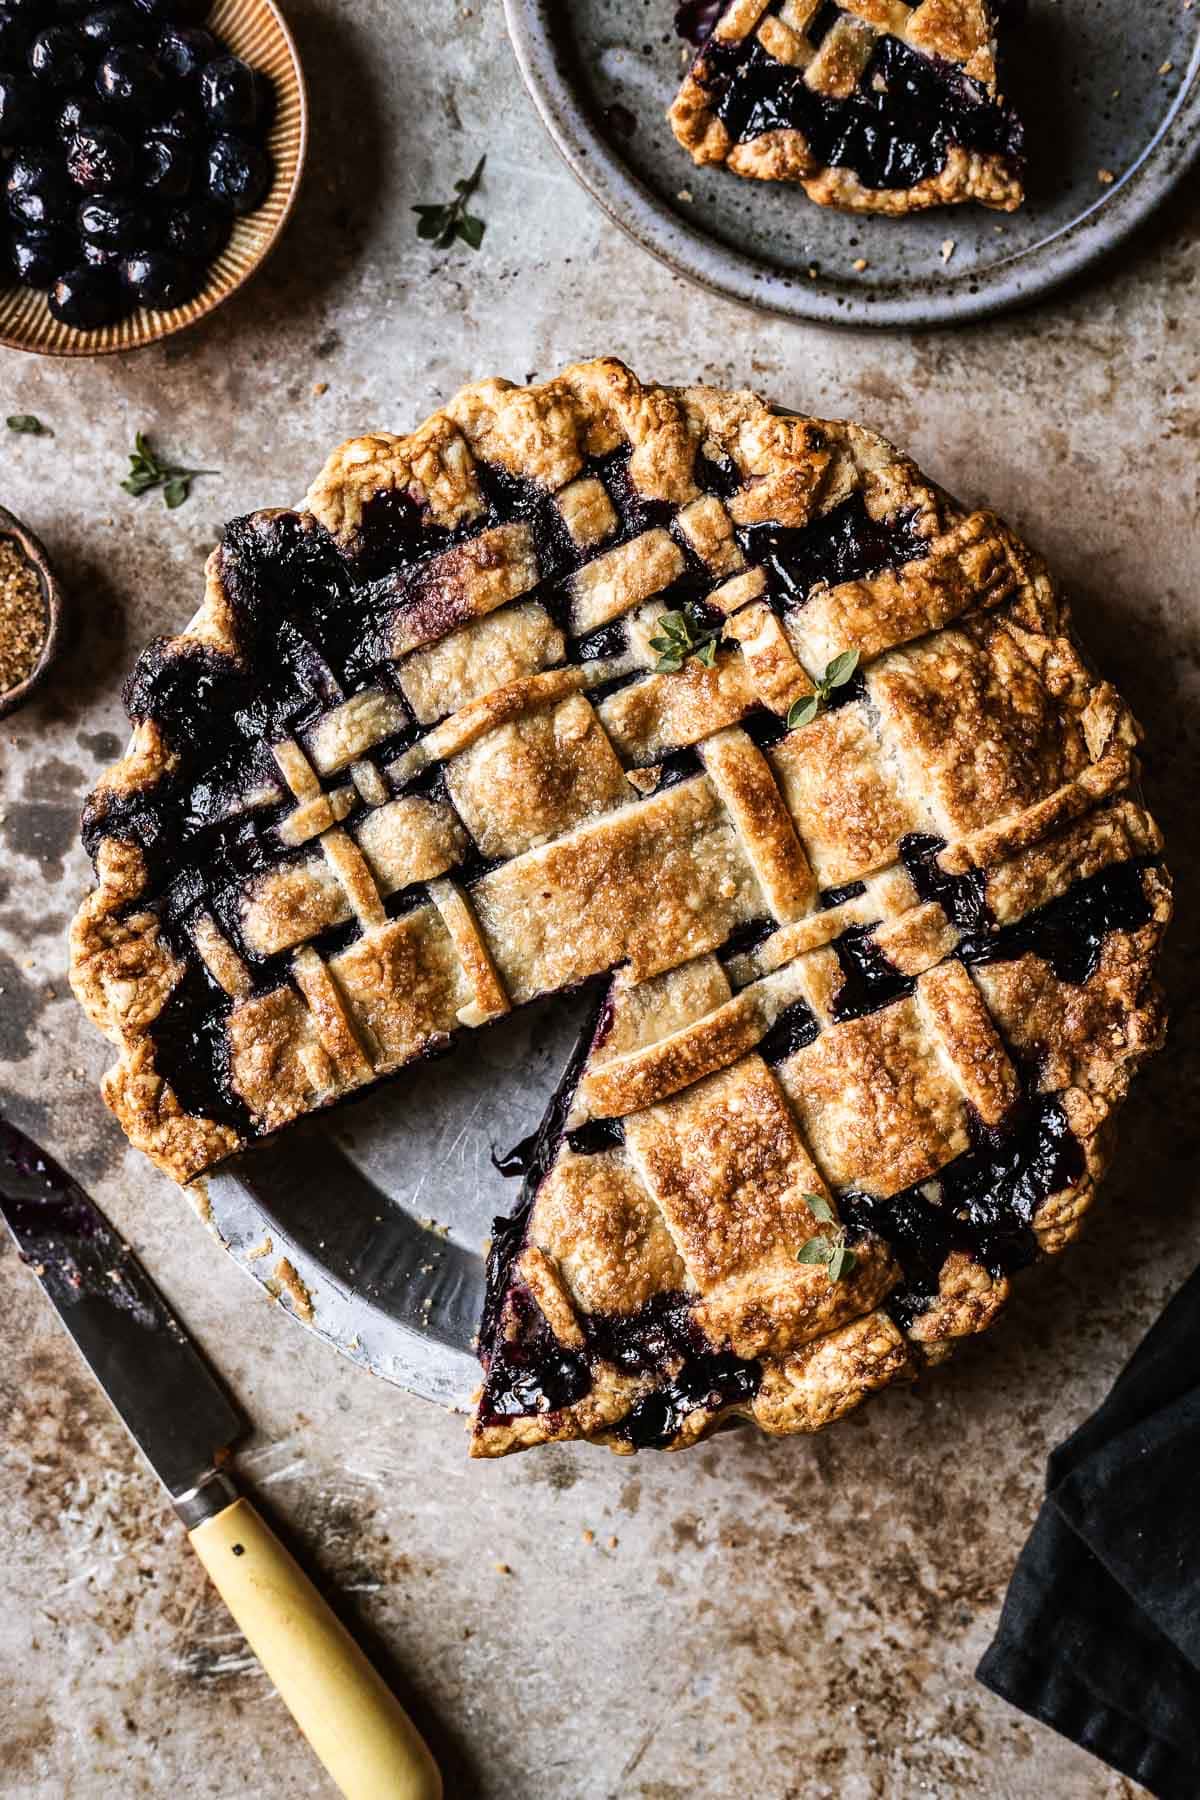 A golden brown, lattice topped blueberry pie with a single slice cut out and placed on a grey ceramic plate next to the pie. A knife rests nearby at bottom left.